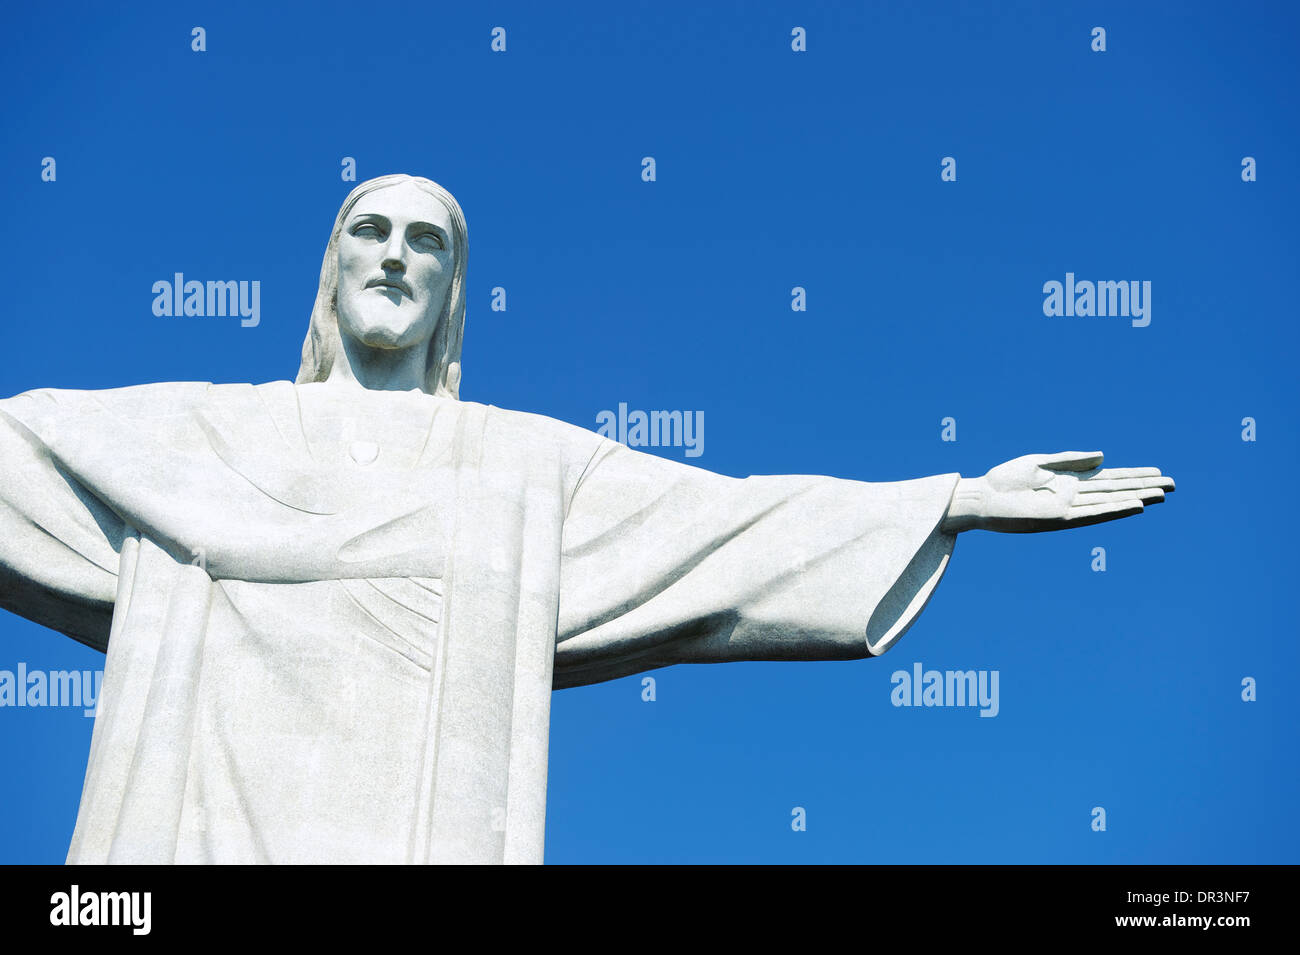 Corcovado Christ the Redeemer stands in blue sky in Rio de Janeiro Brazil Stock Photo